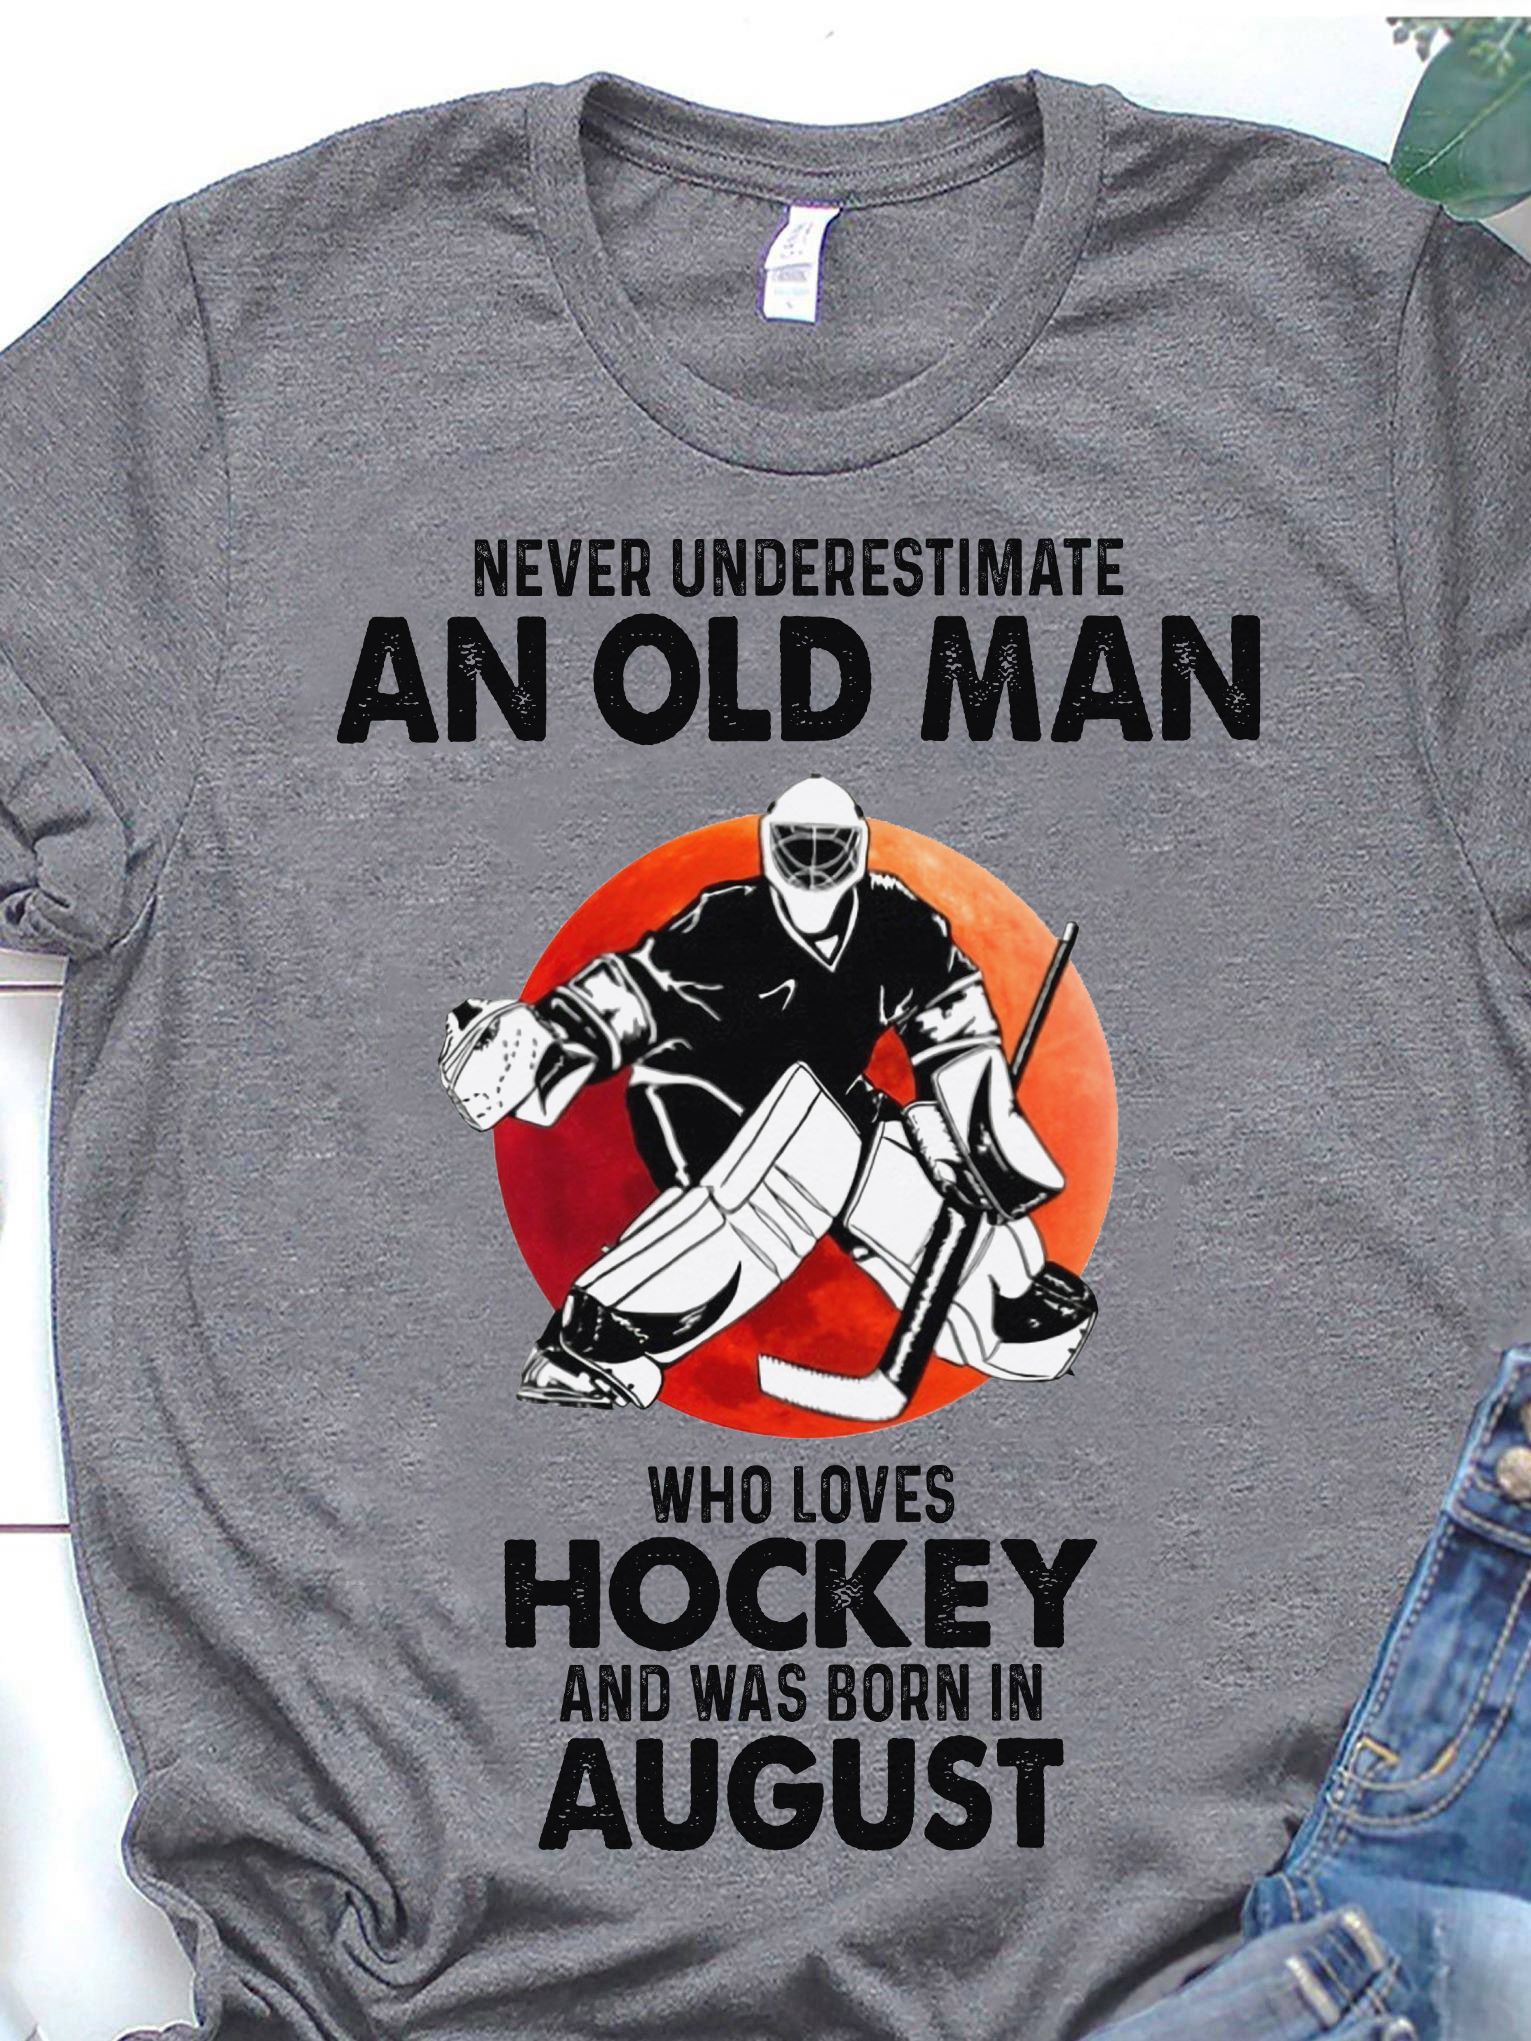 Never underestimate an old man who loves hockey and was born in August